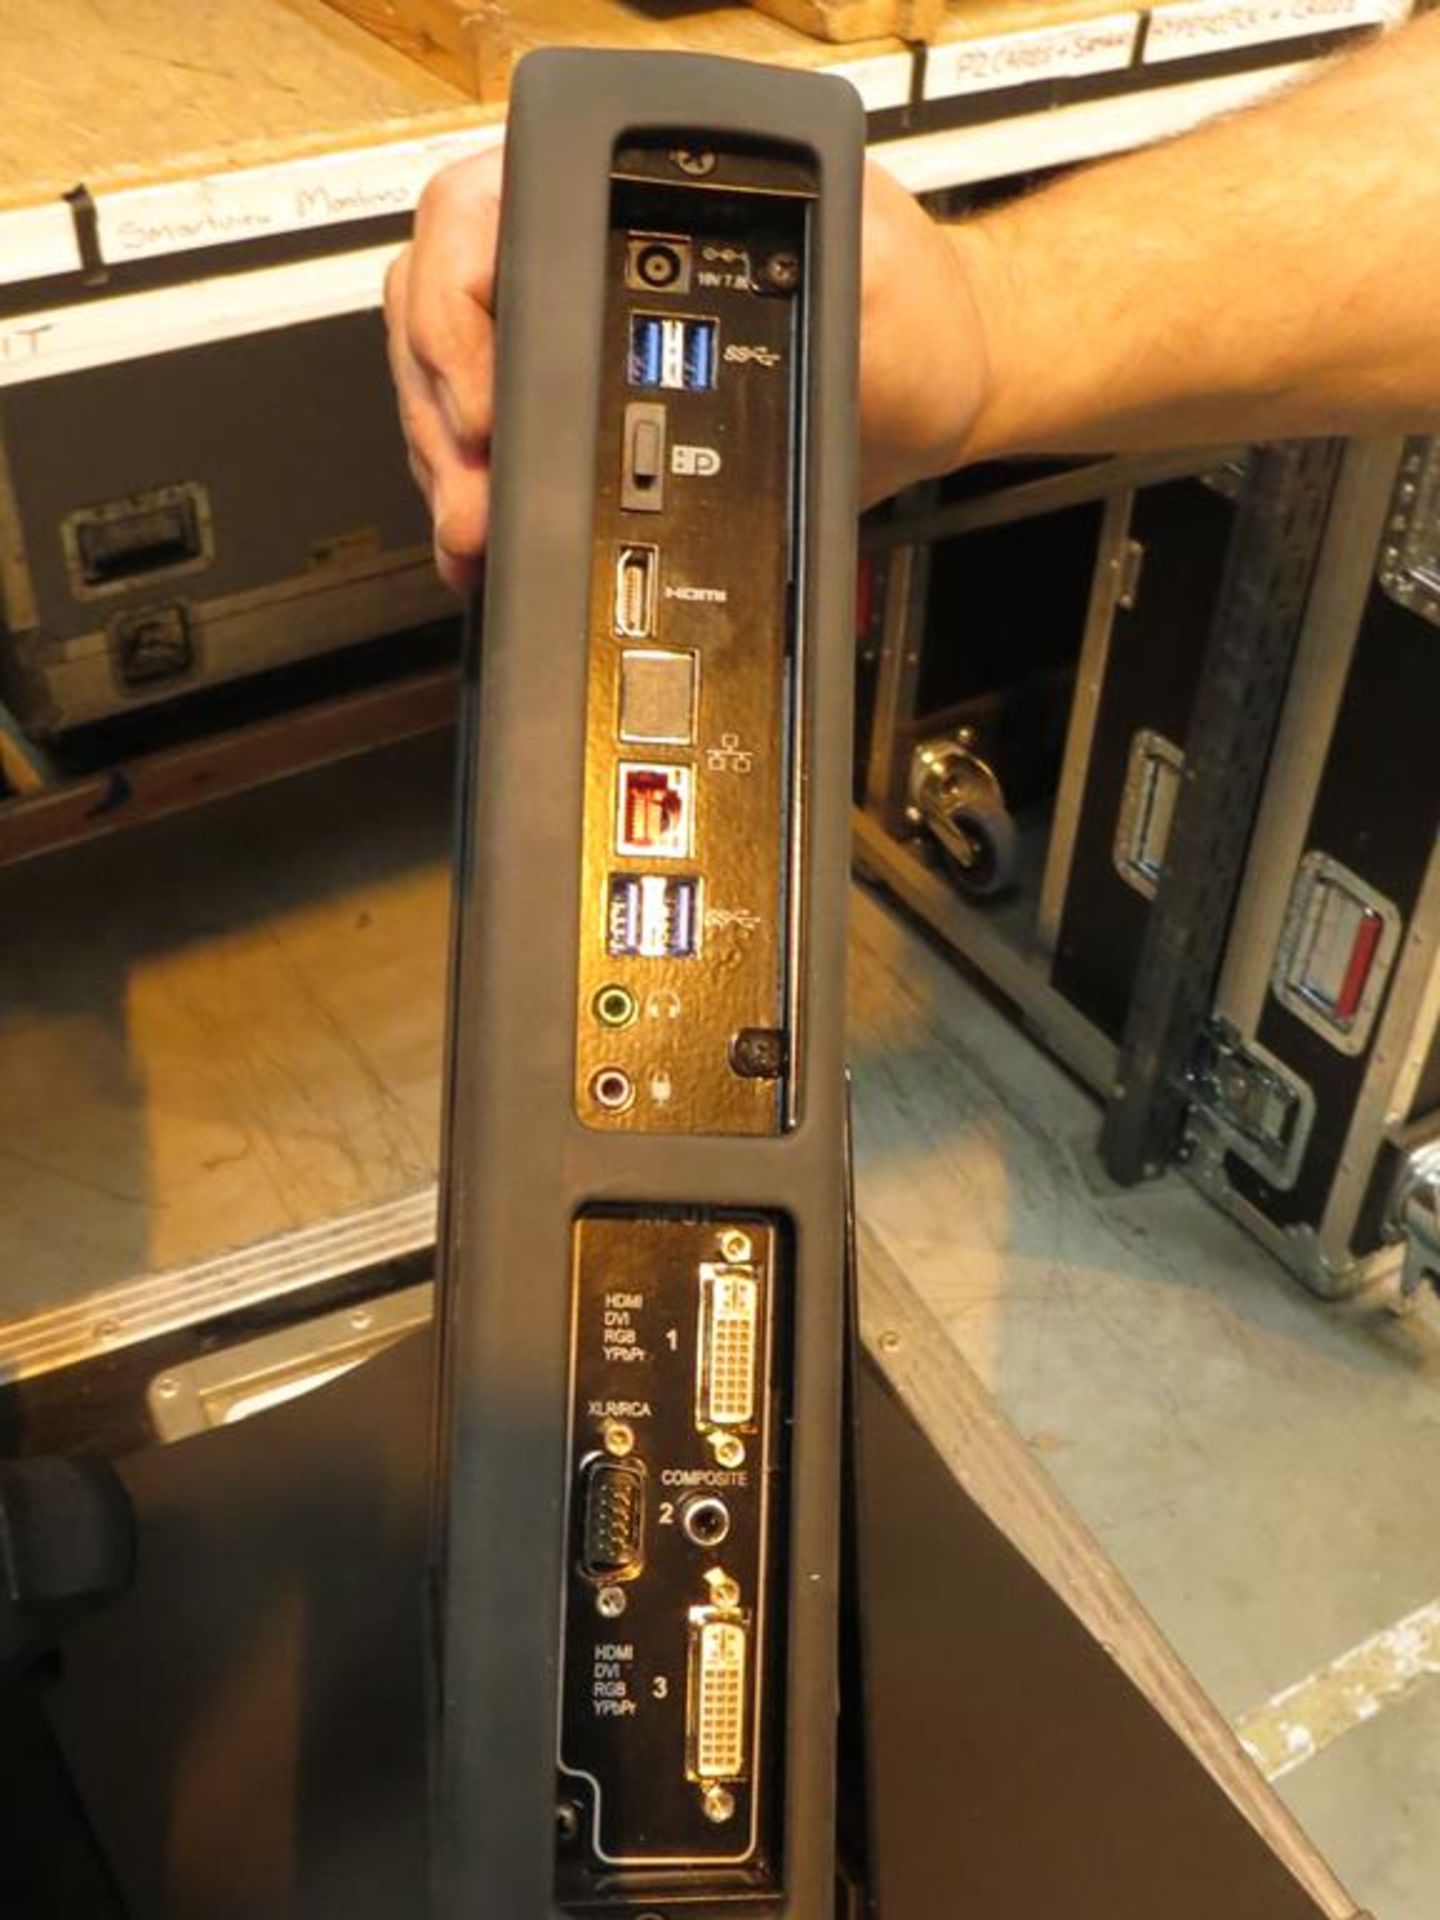 Sonic Foundry, Mediasite HD web/live streaming system, Model MSL-CSL-820R2, Serial No. 0035990023 in - Image 3 of 5